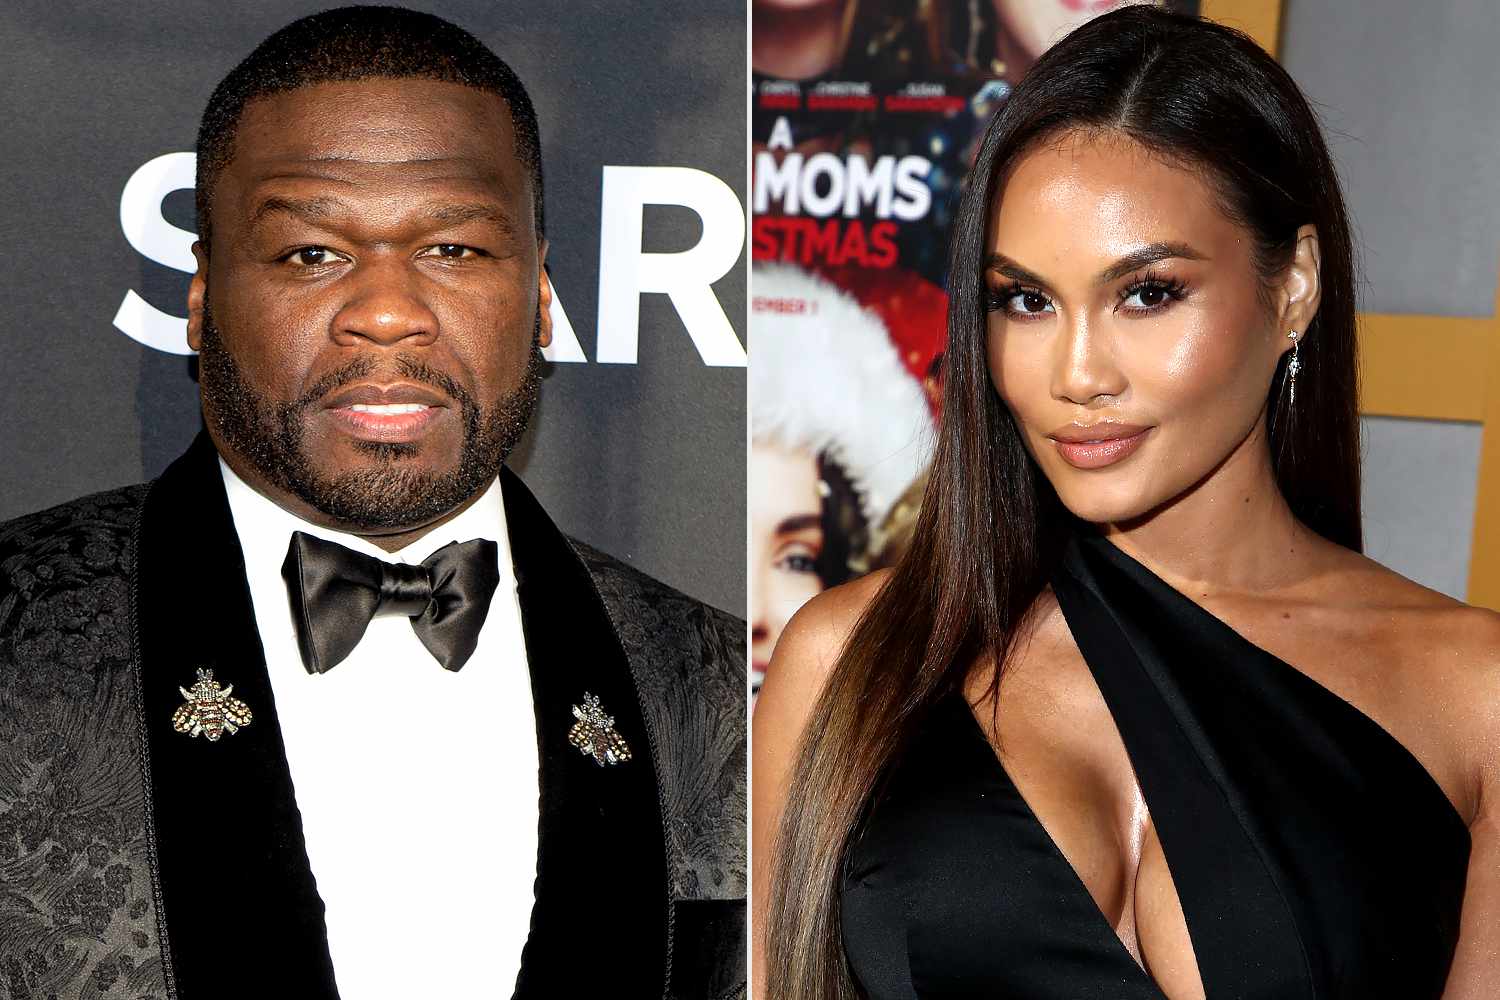 50 Cent Sues Ex Daphne Joy for Defamation as He Claims She Accused Him of Rape and Physical Abuse 'Out of Sheer Hatred'